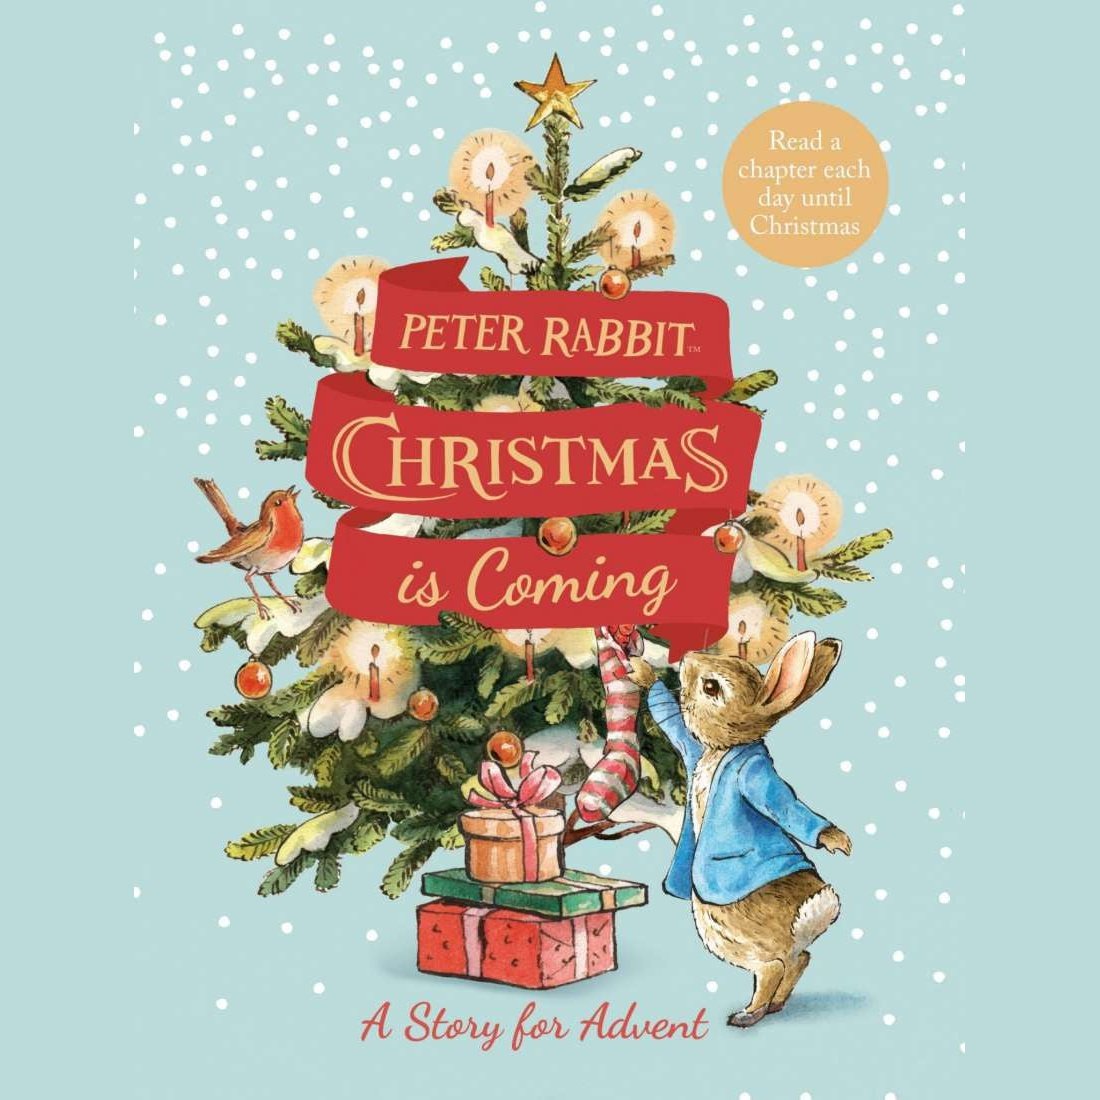 Peter Rabbit: Christmas Is Coming